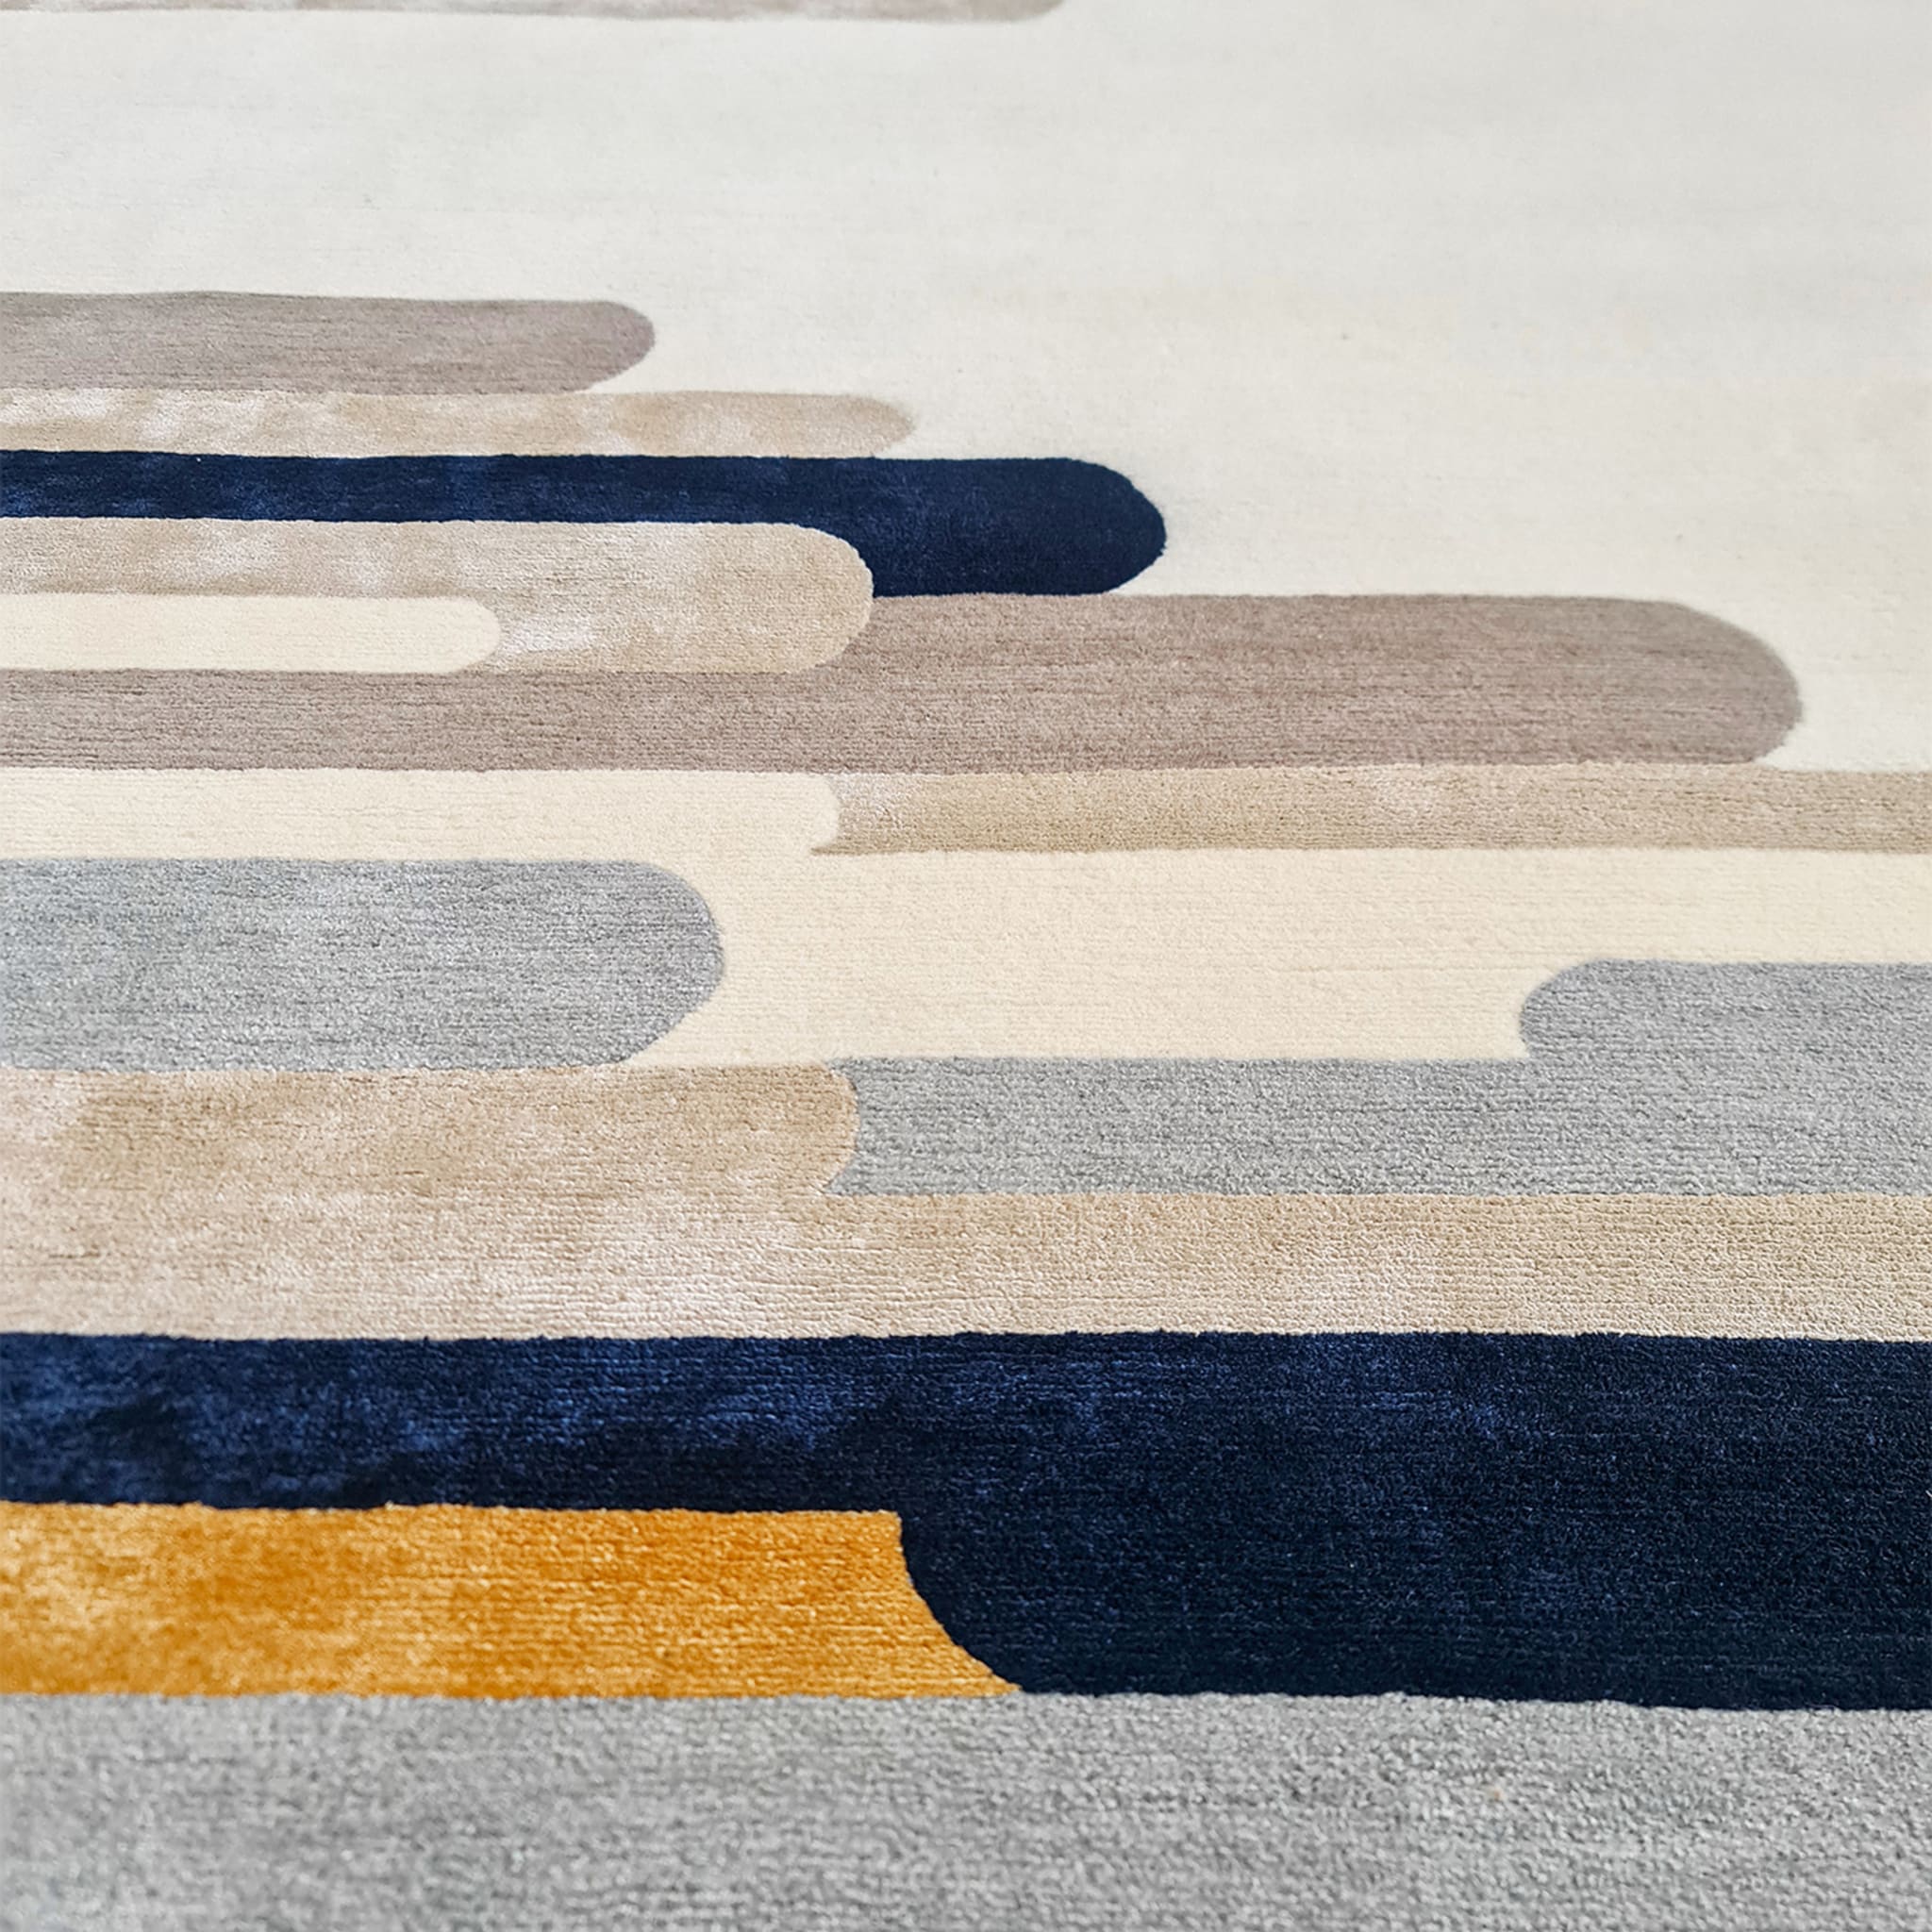 Ambiance Collection Rue Cler Rug - Alternative view 2